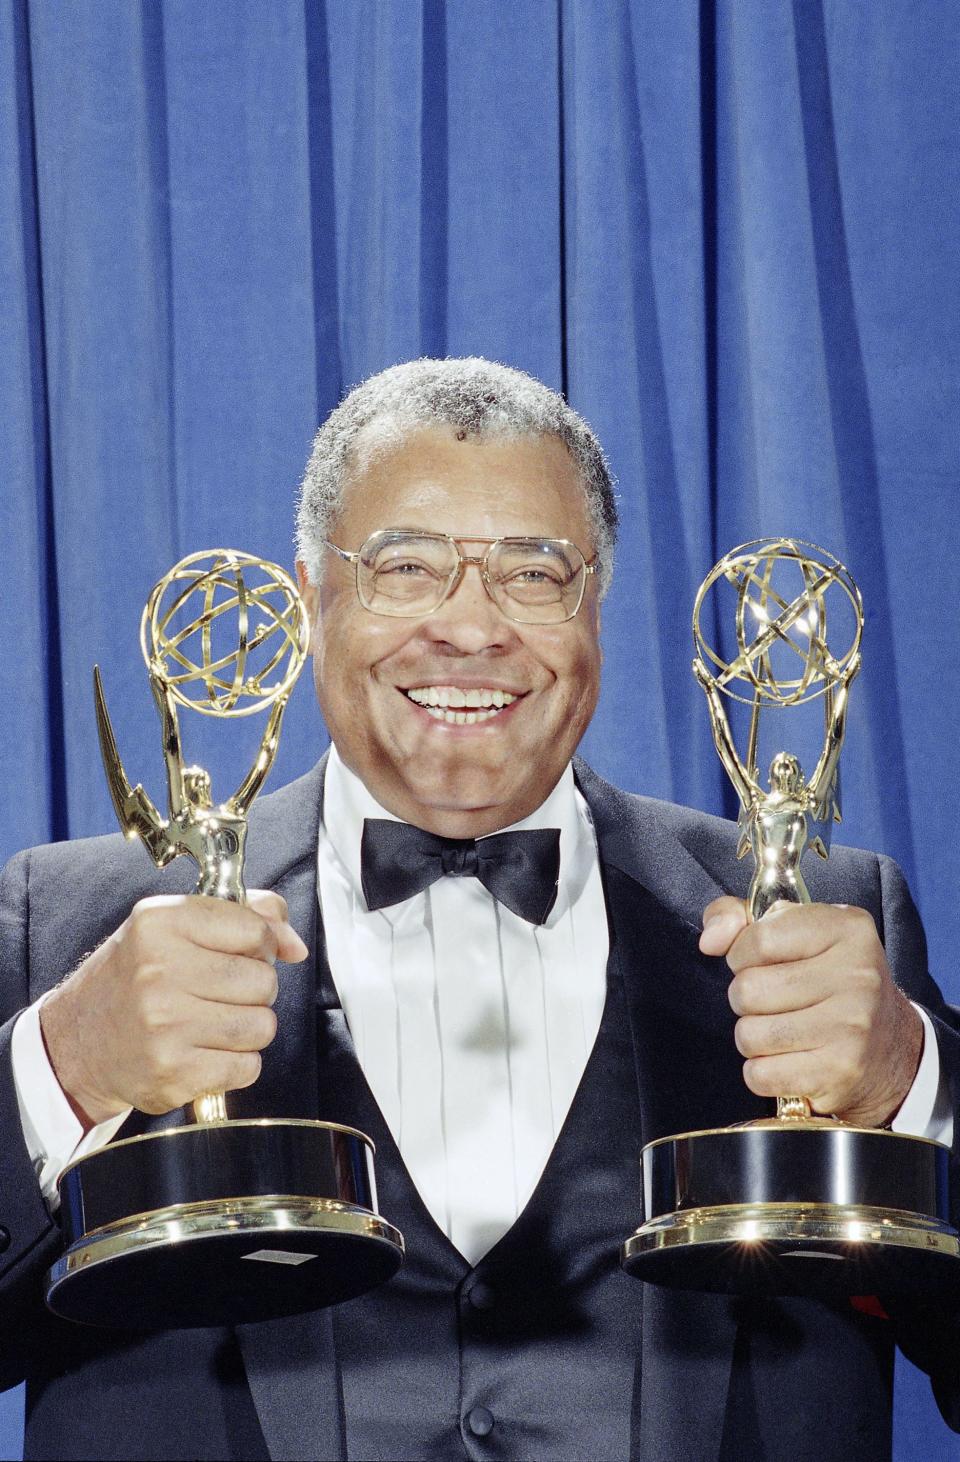 1991: Actor James Earl Jones holds up his two Emmys for photographers backstage at the 43rd annual Emmy Awards in Pasadena, Sunday, August 25, 1991. Jones won Emmys for best lead actor in a drama series for 